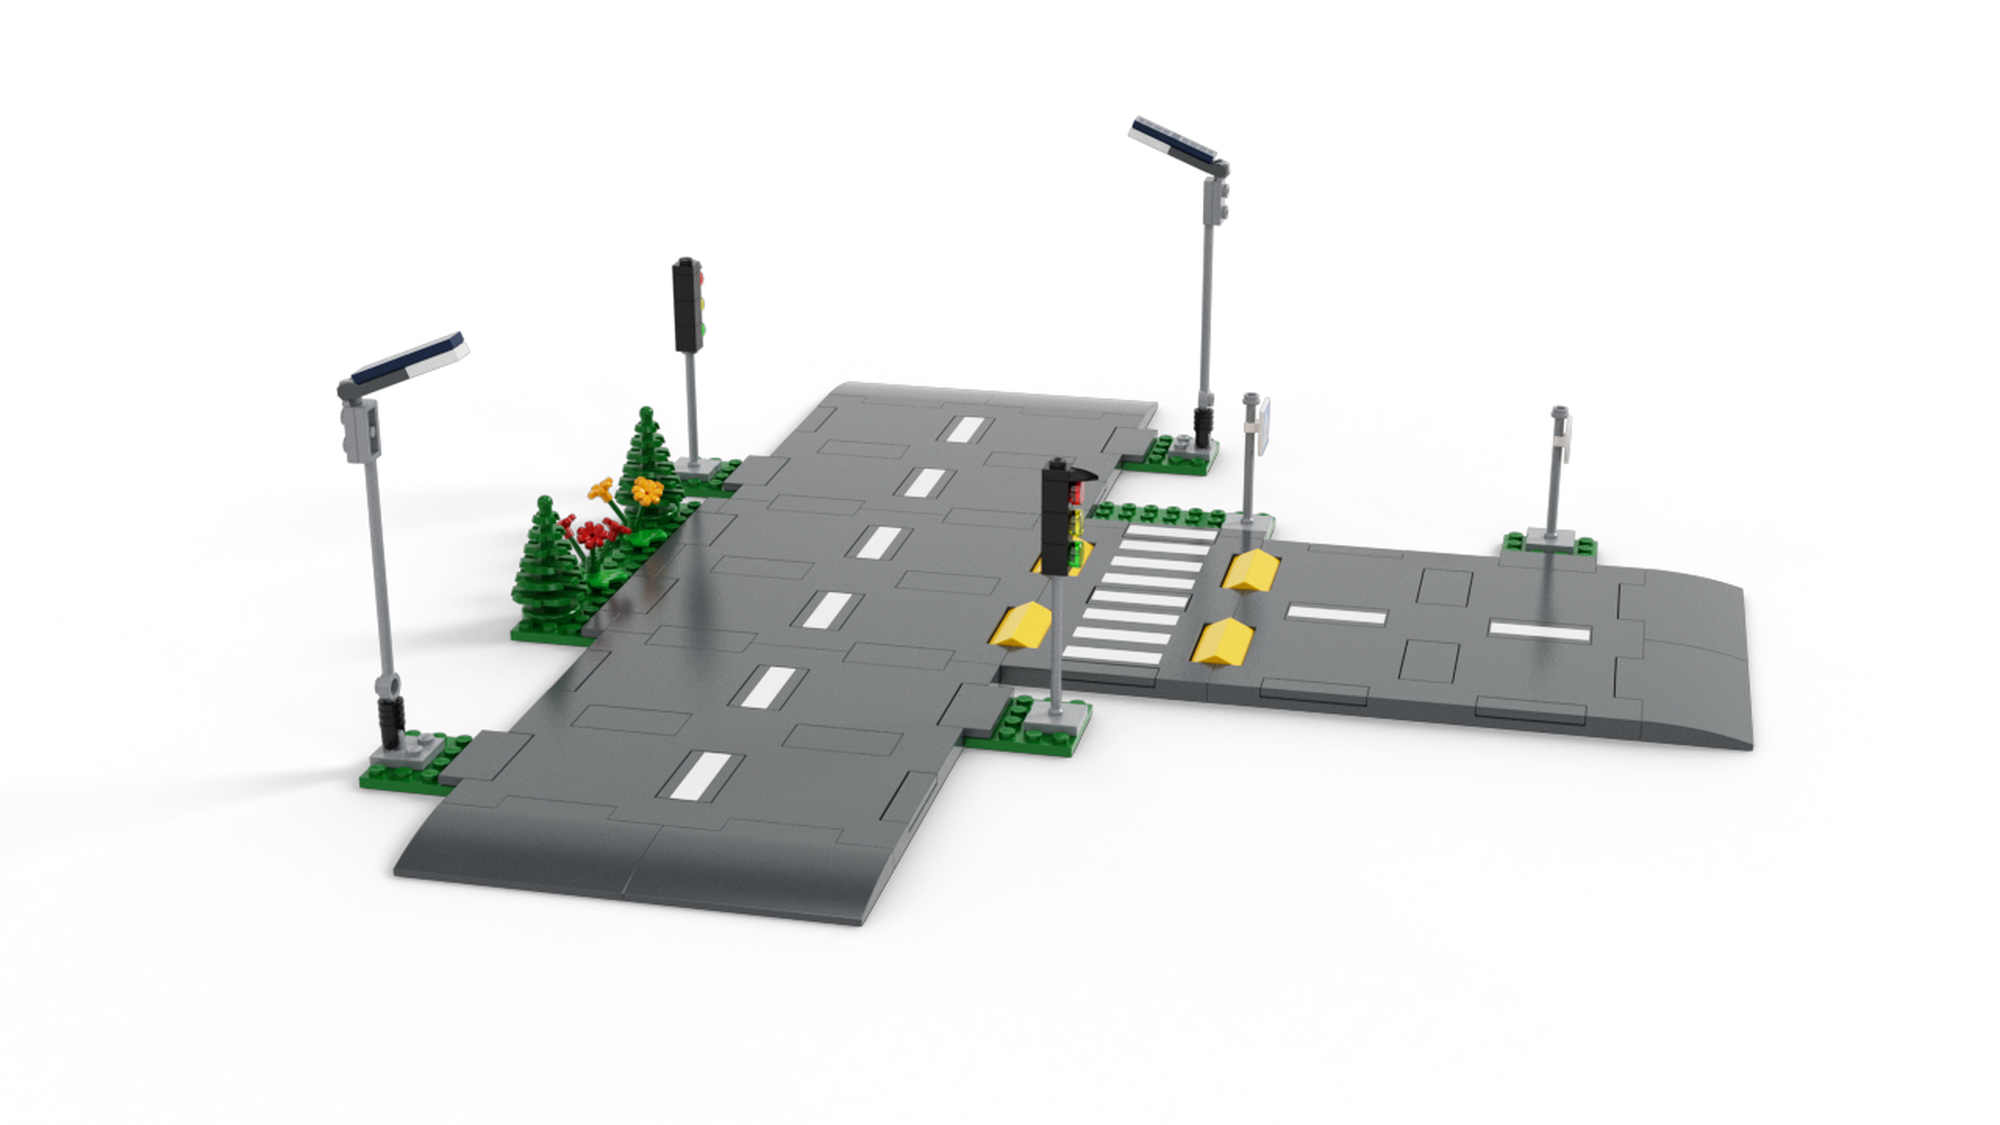 LEGO City Road Plates Building Toy Set, 60304 with Traffic Lights, Trees &  Glow in the Dark Bricks, Gifts for 5 Plus Year Old Kids, Boys & Girls 